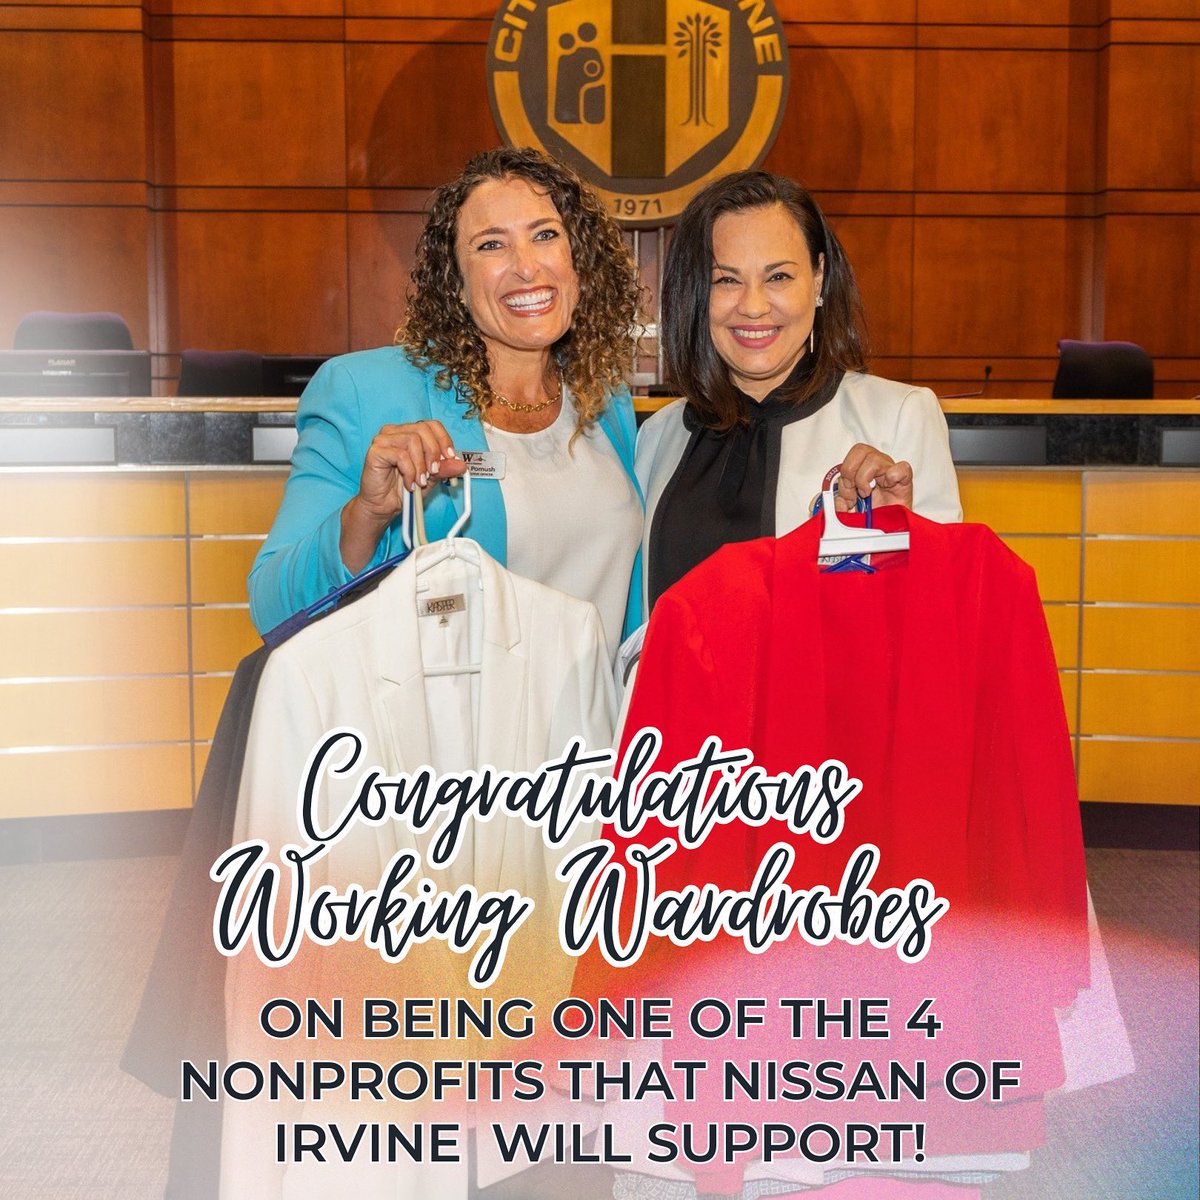 Join me in congratulating @WorkingWardrobe for being selected as one of 4 nonprofits that the incredible team @nissanofirvine chose to support in 2024! Nissan of Irvine is an awesome partner, and I couldn't be more thrilled to see them going above and beyond to support our…